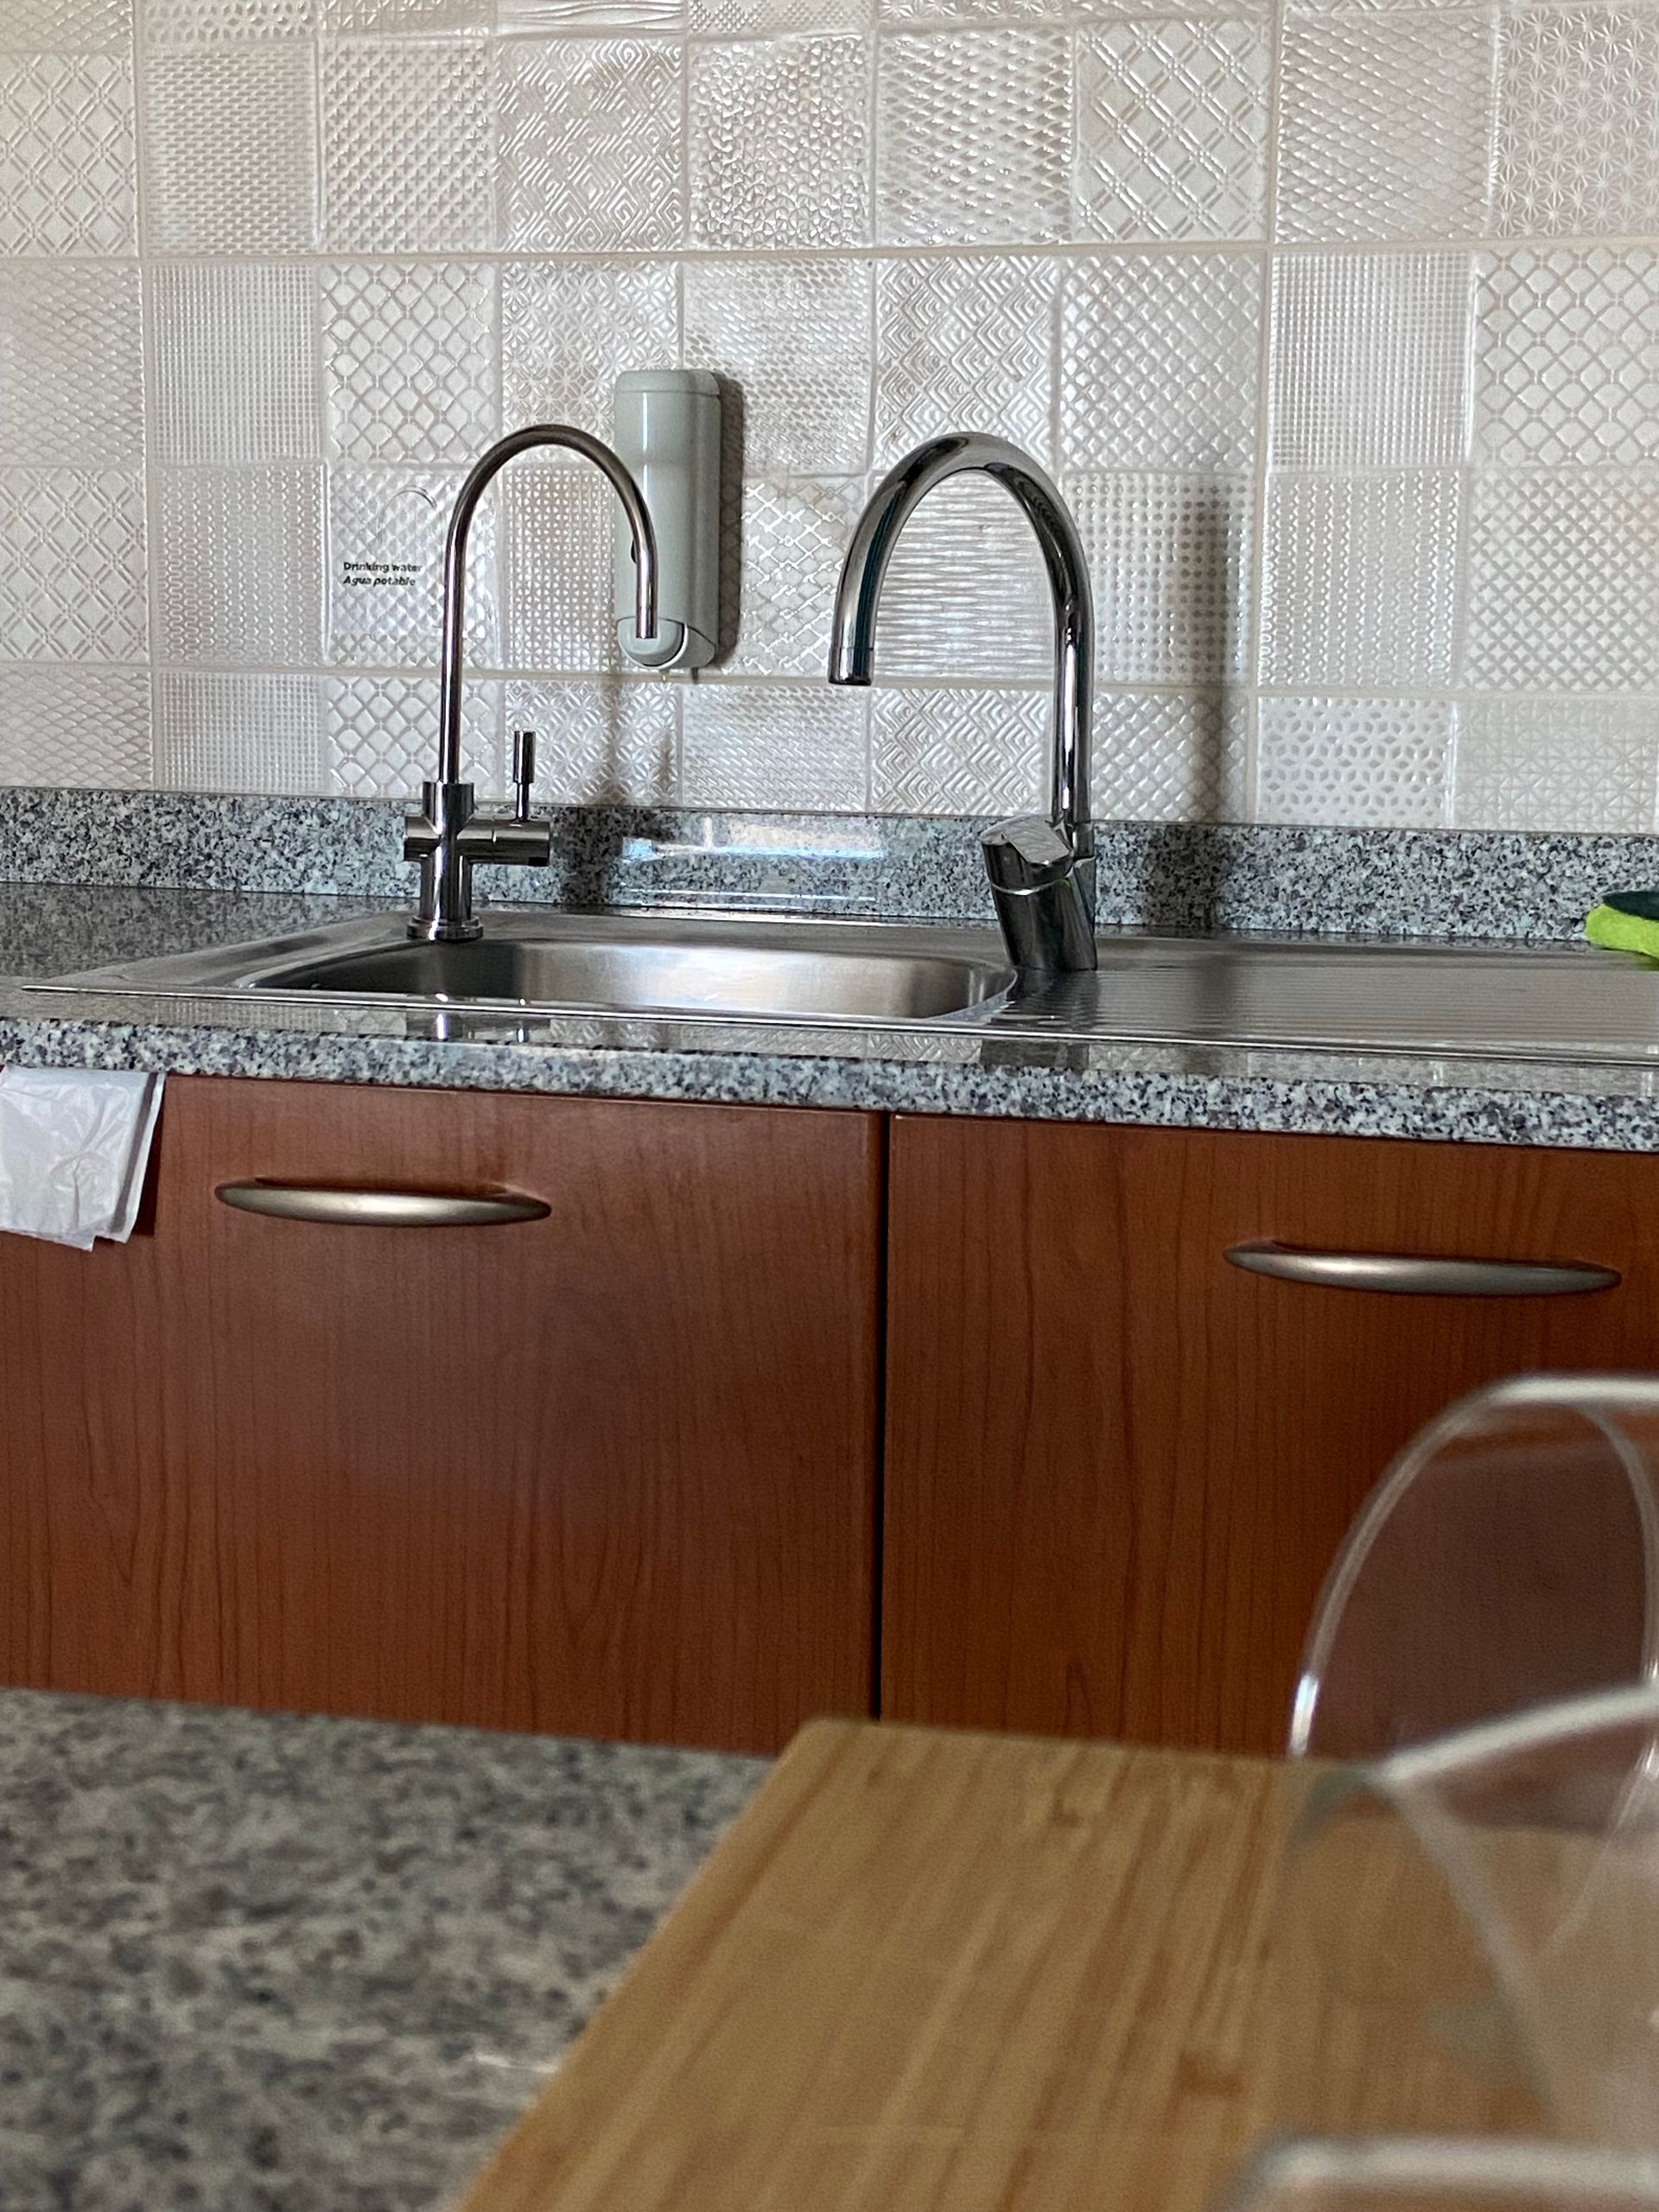 Drinking water agua potable faucet with a water filter Villa Canaima Apartments Lanzarote